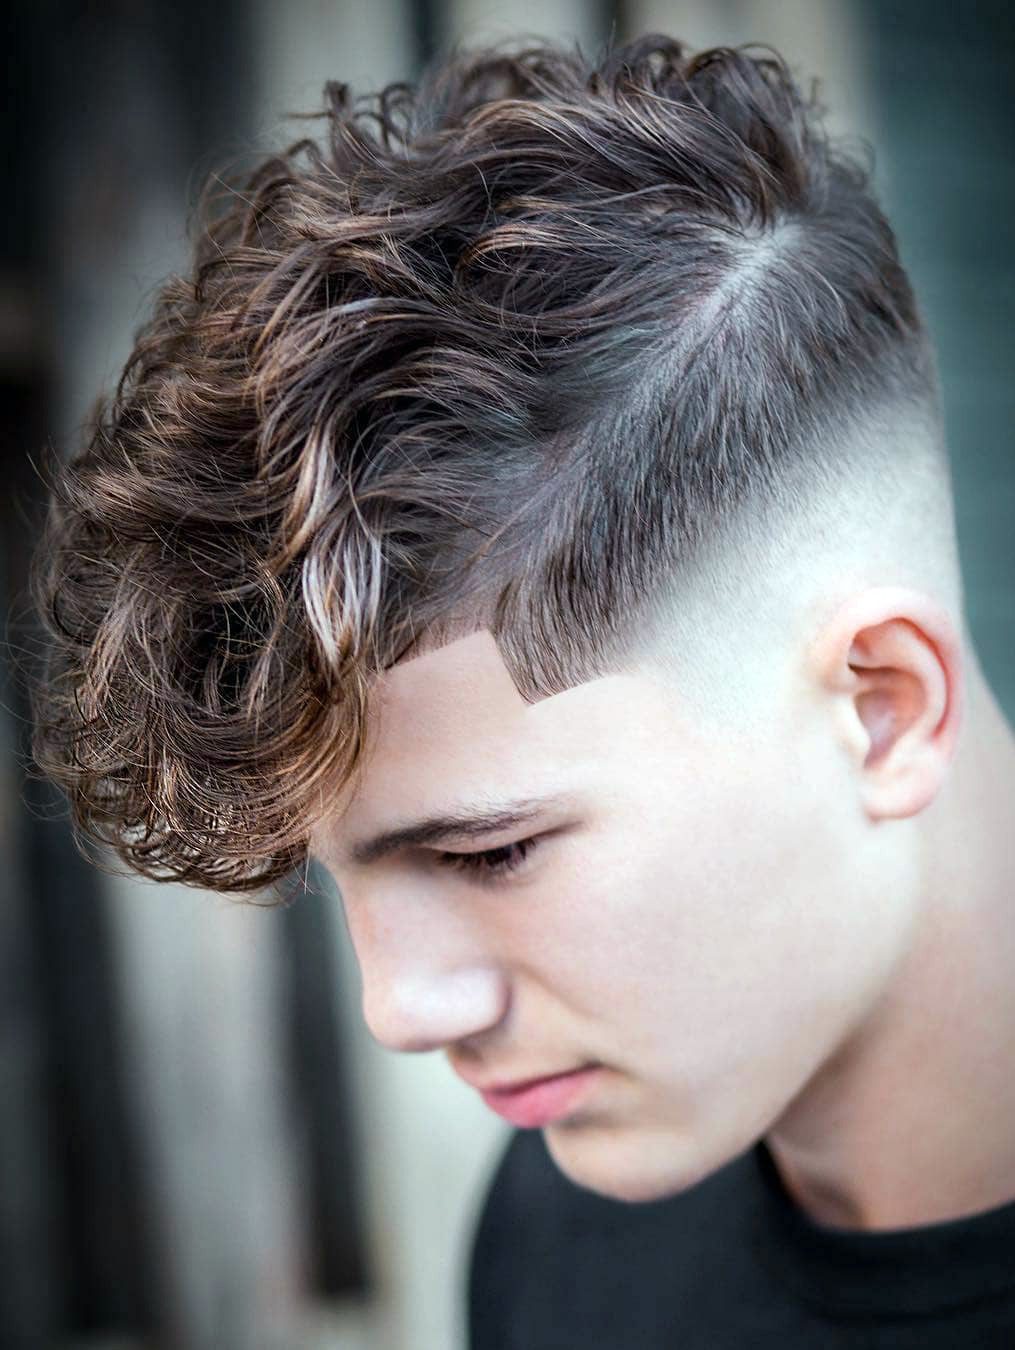 The 15 Best Curly Hair Cuts and Styles To Try